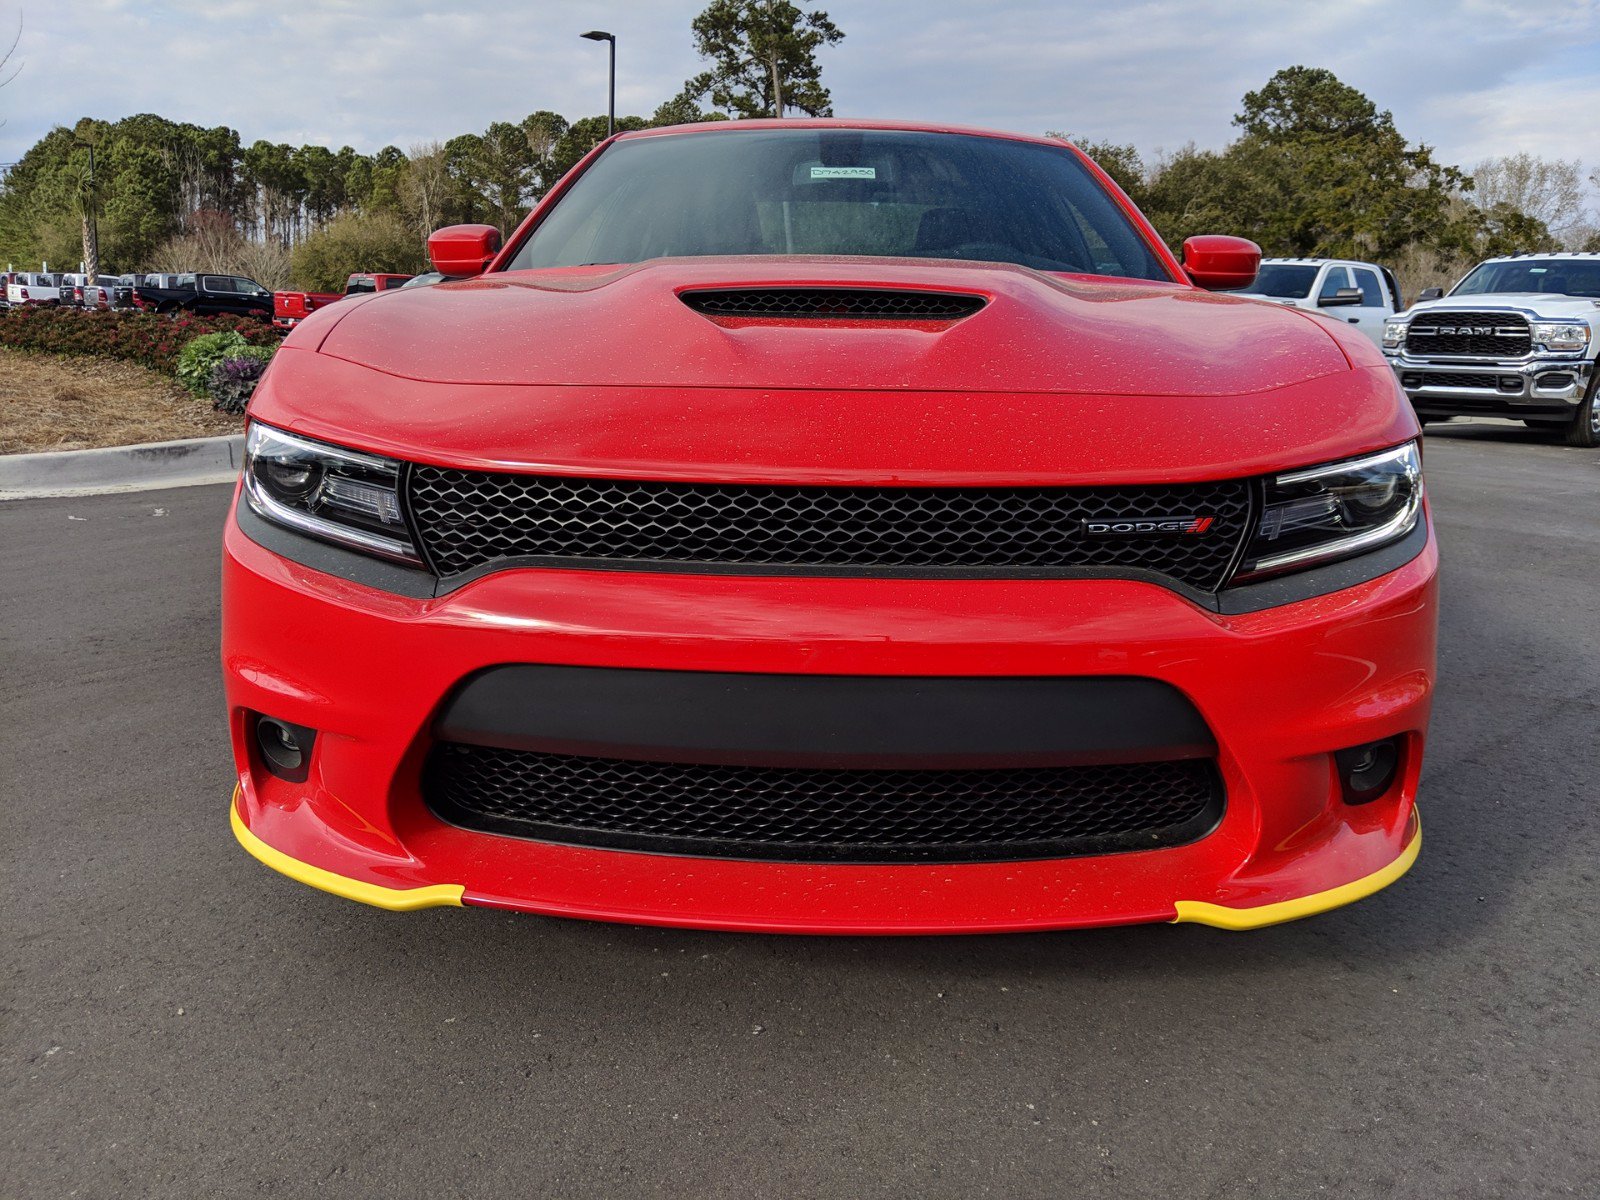 Dodge Charger Rt 2019 Specs